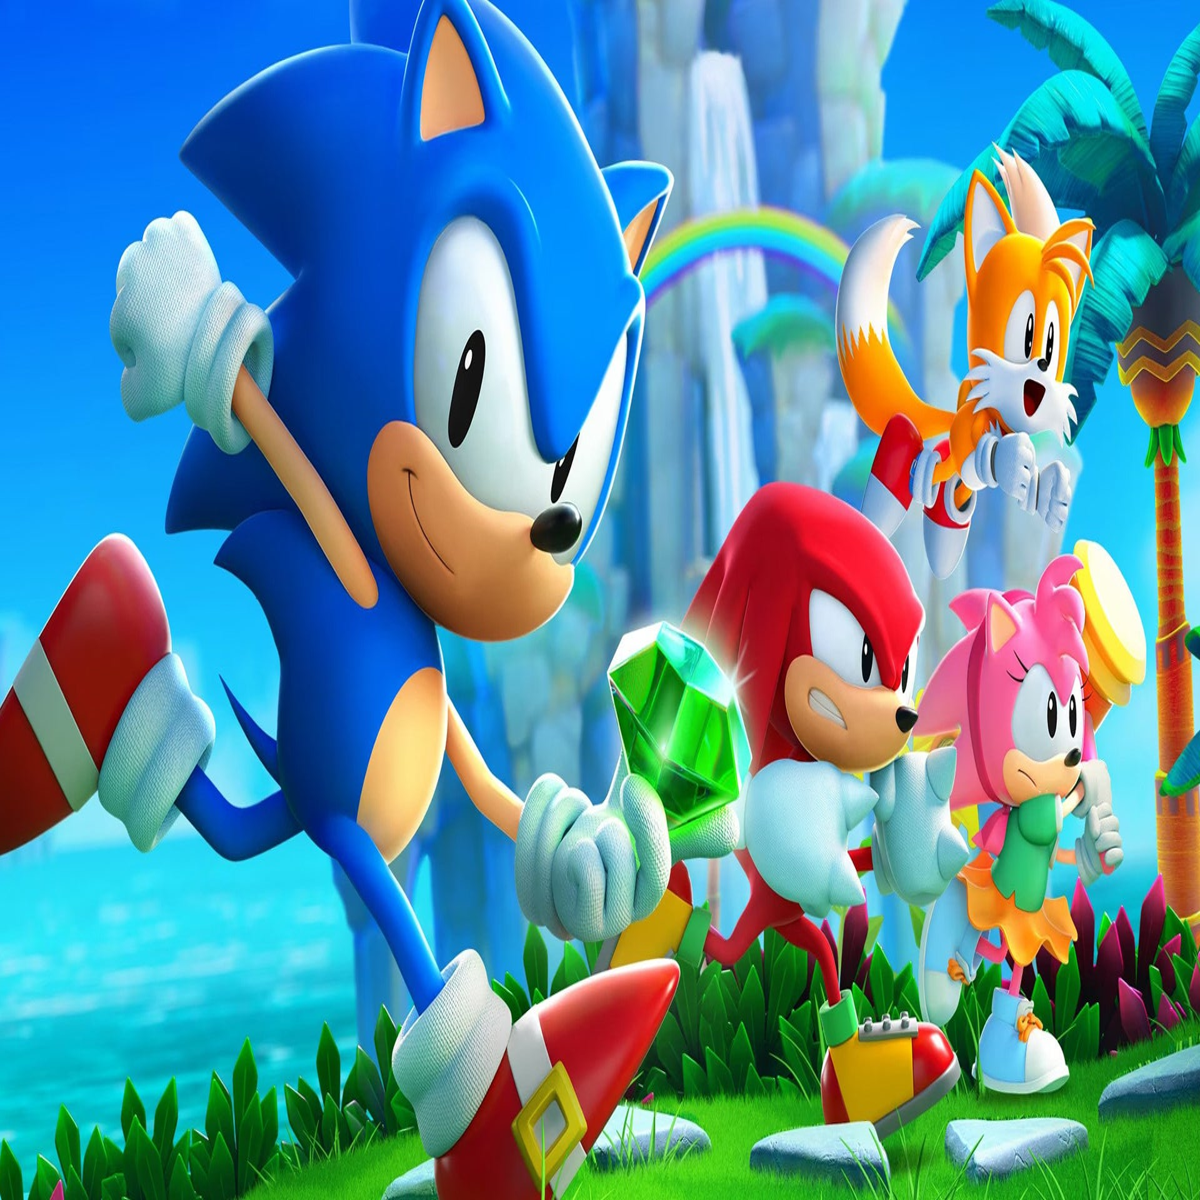 Sonic Superstars changes the series' direction once again